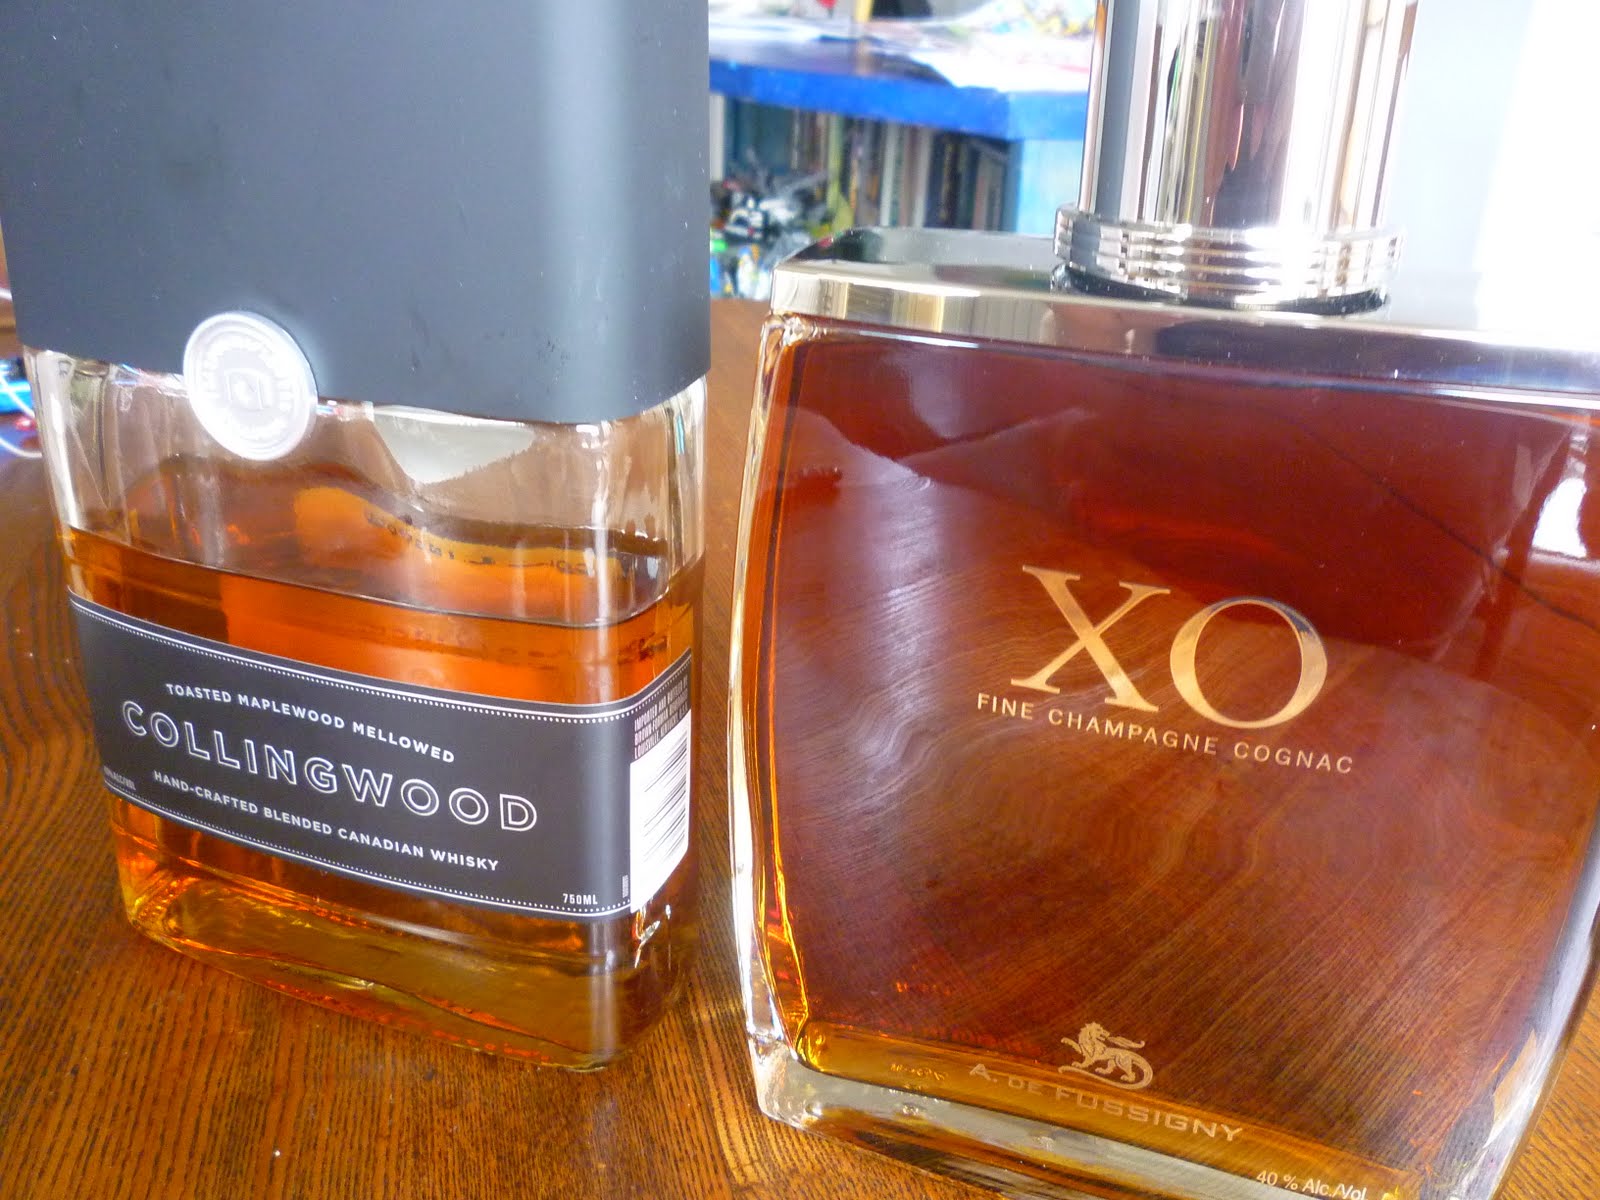 20 liquor bottles that you will keep when they're empty